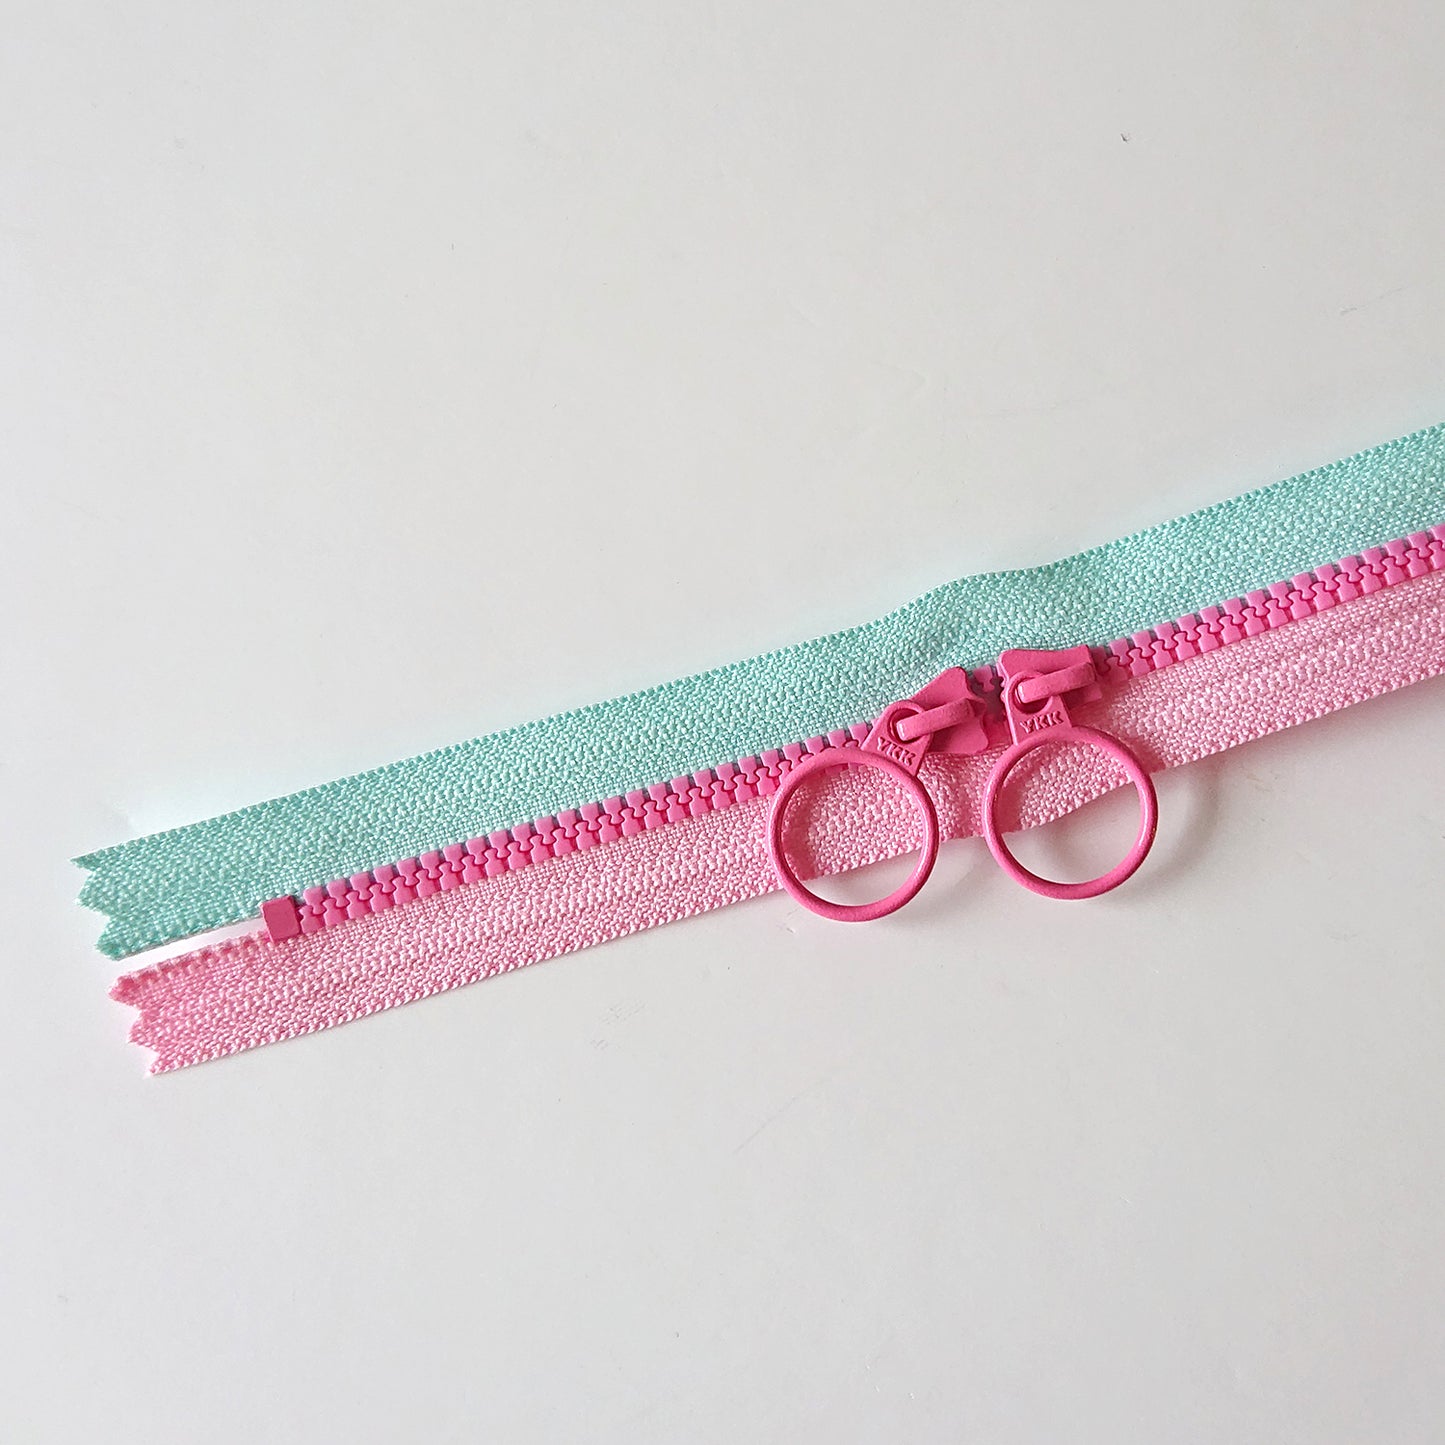 YKK Triple Zipper- Light Blue and Pink with Rosy Pink Zip  (50cm)